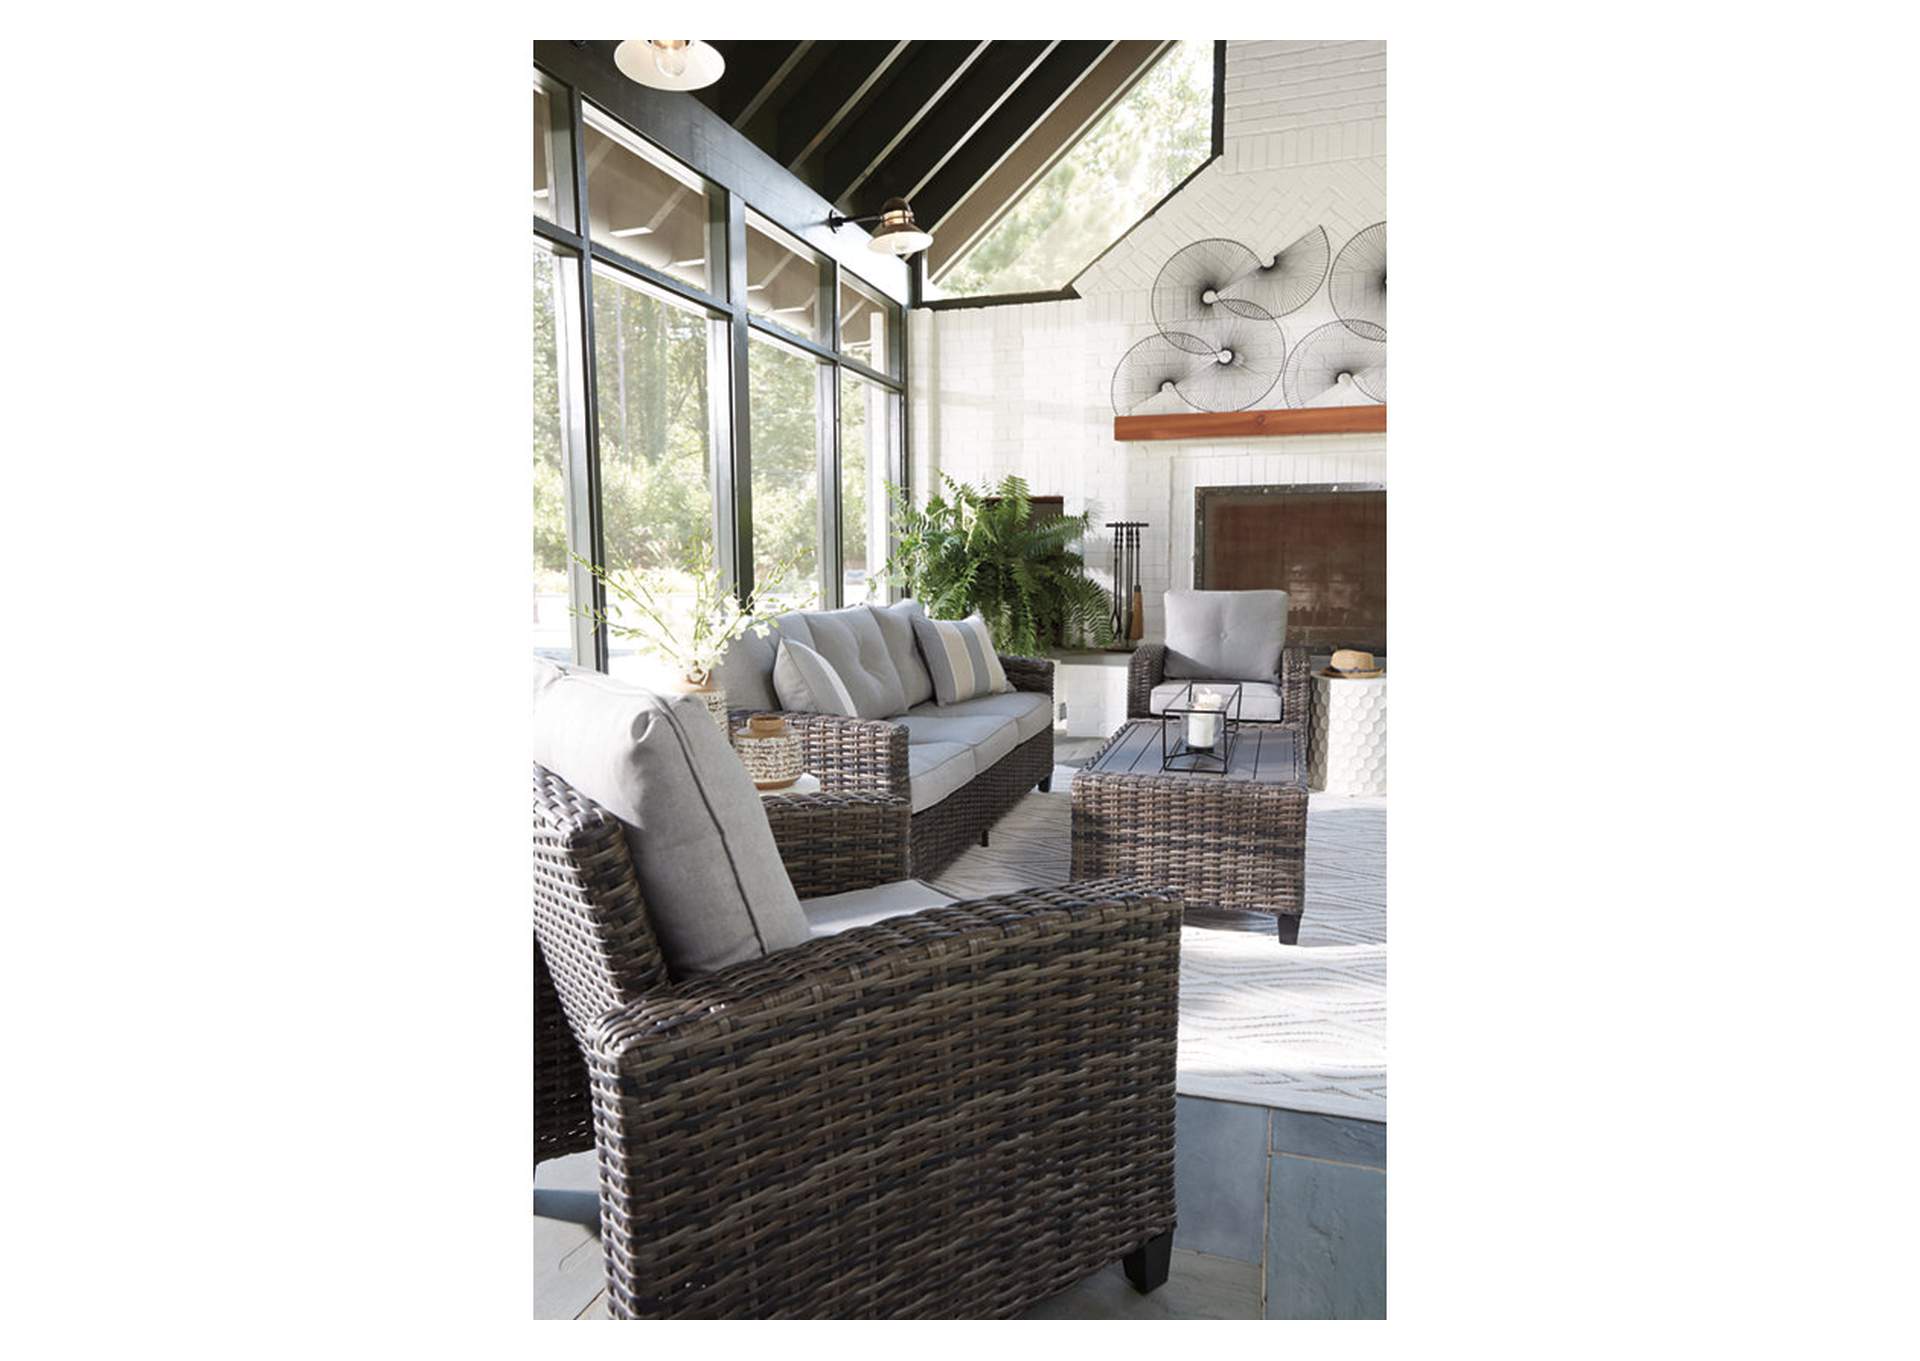 Cloverbrooke 4-Piece Outdoor Conversation Set,Outdoor By Ashley